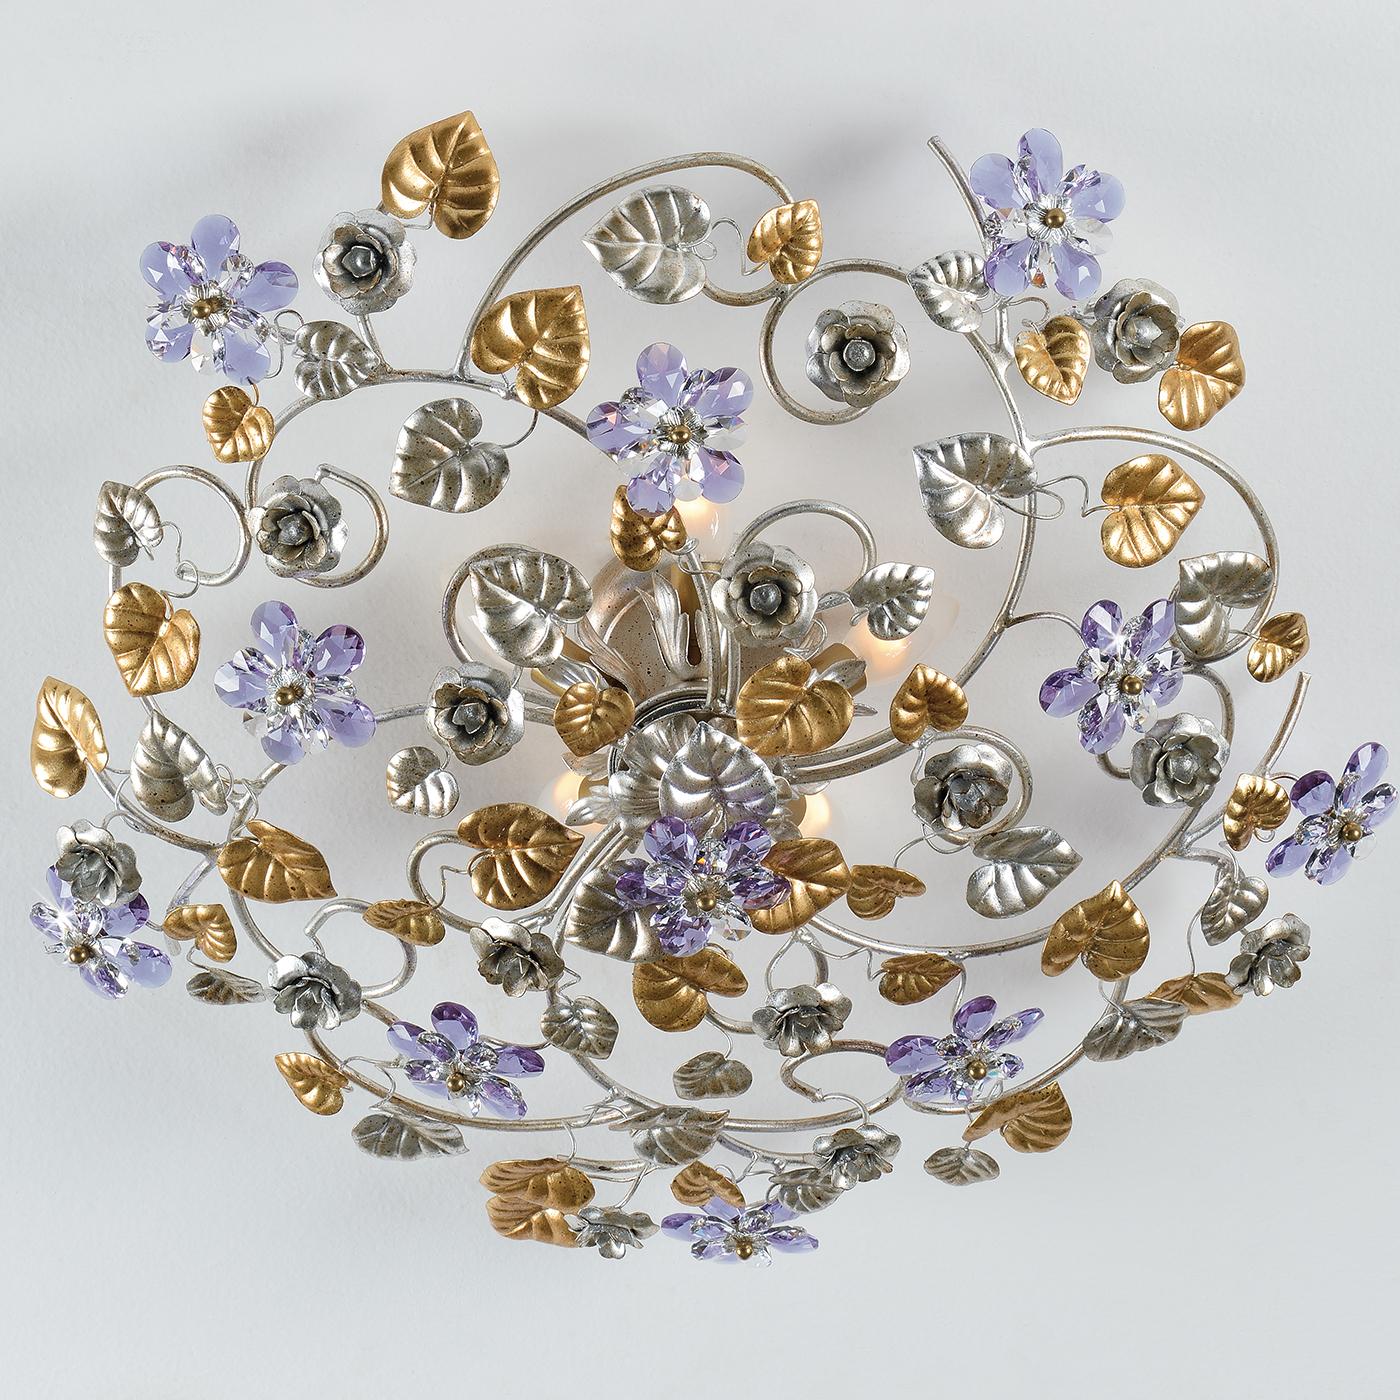 Delightfully elaborate and ornate, this stunning 5 Light Ceiling Lamp is beautifully crafted in metal and decorated with splendid antique silver and gold leaf detail. The exquisite flowers in a two-tone lilac crystal are the perfect complimenting